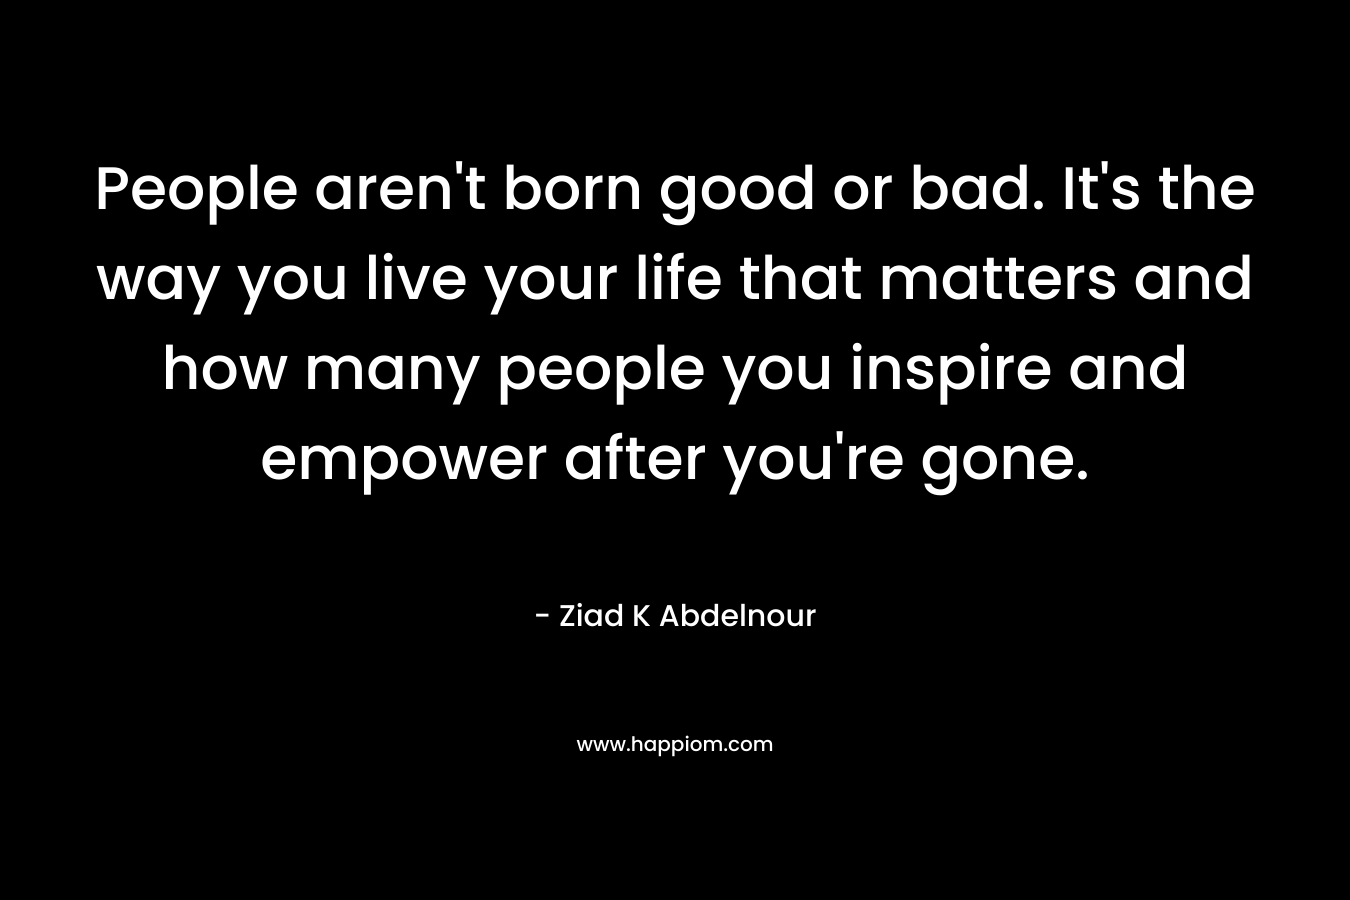 People aren't born good or bad. It's the way you live your life that matters and how many people you inspire and empower after you're gone.